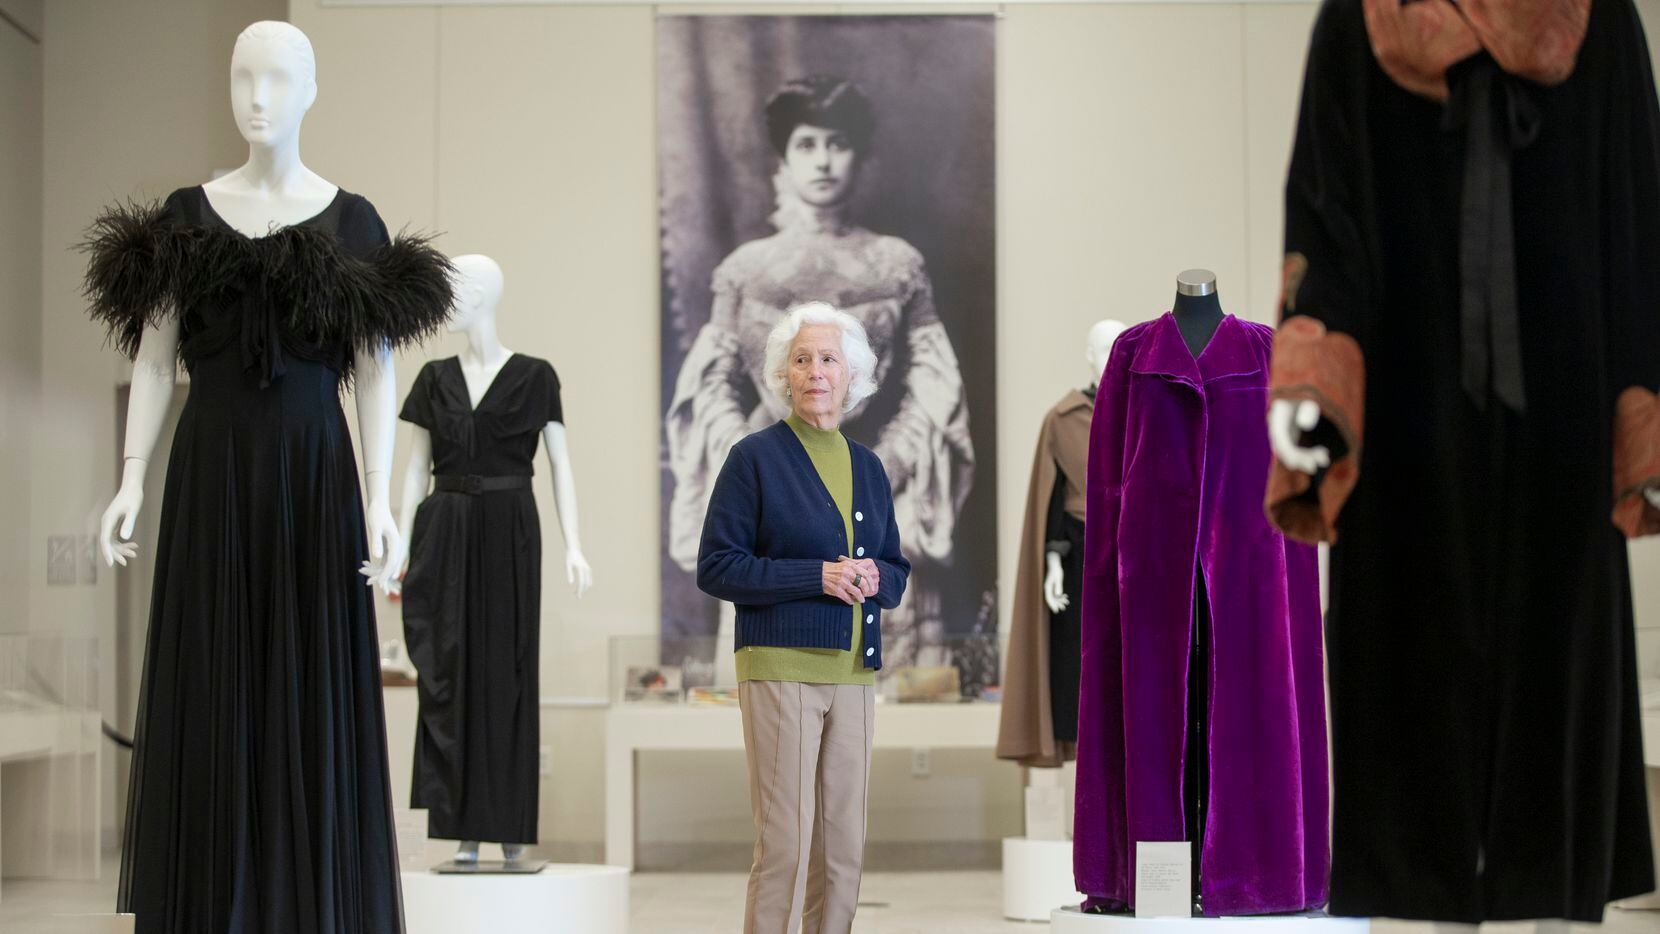 Jerrie Marcus Smith, 85, poses with coats and gowns from the Texas Fashion Collection featured in the exhibition “An Eye for Elegance: Carrie Marcus Neiman and the Women Who Shaped Neiman Marcus” at the Hillcrest Exhibition Hall in the Fondren Library at Southern Methodist University on Dec. 17, 2021.